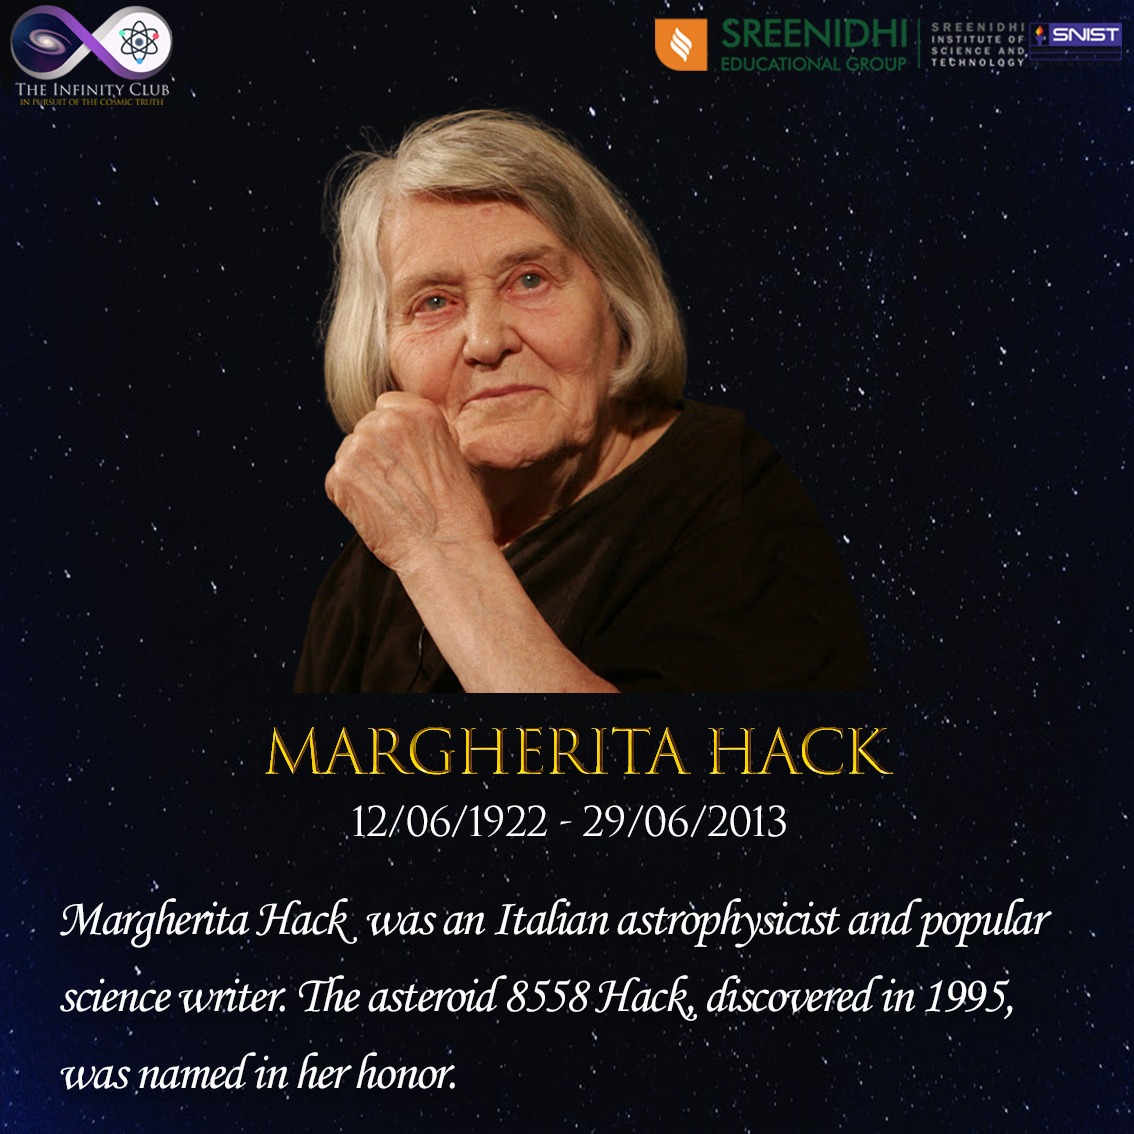 'We act in good conscience because we believe in moral principles, not because we expect an award in Paradise.”
#margheritahack #ladyofstars #theinfinityclubsnist #hyderabad #snist #99thanniversary #googledoodle #tributes #birthday #astronomer #astronomy #philosophy